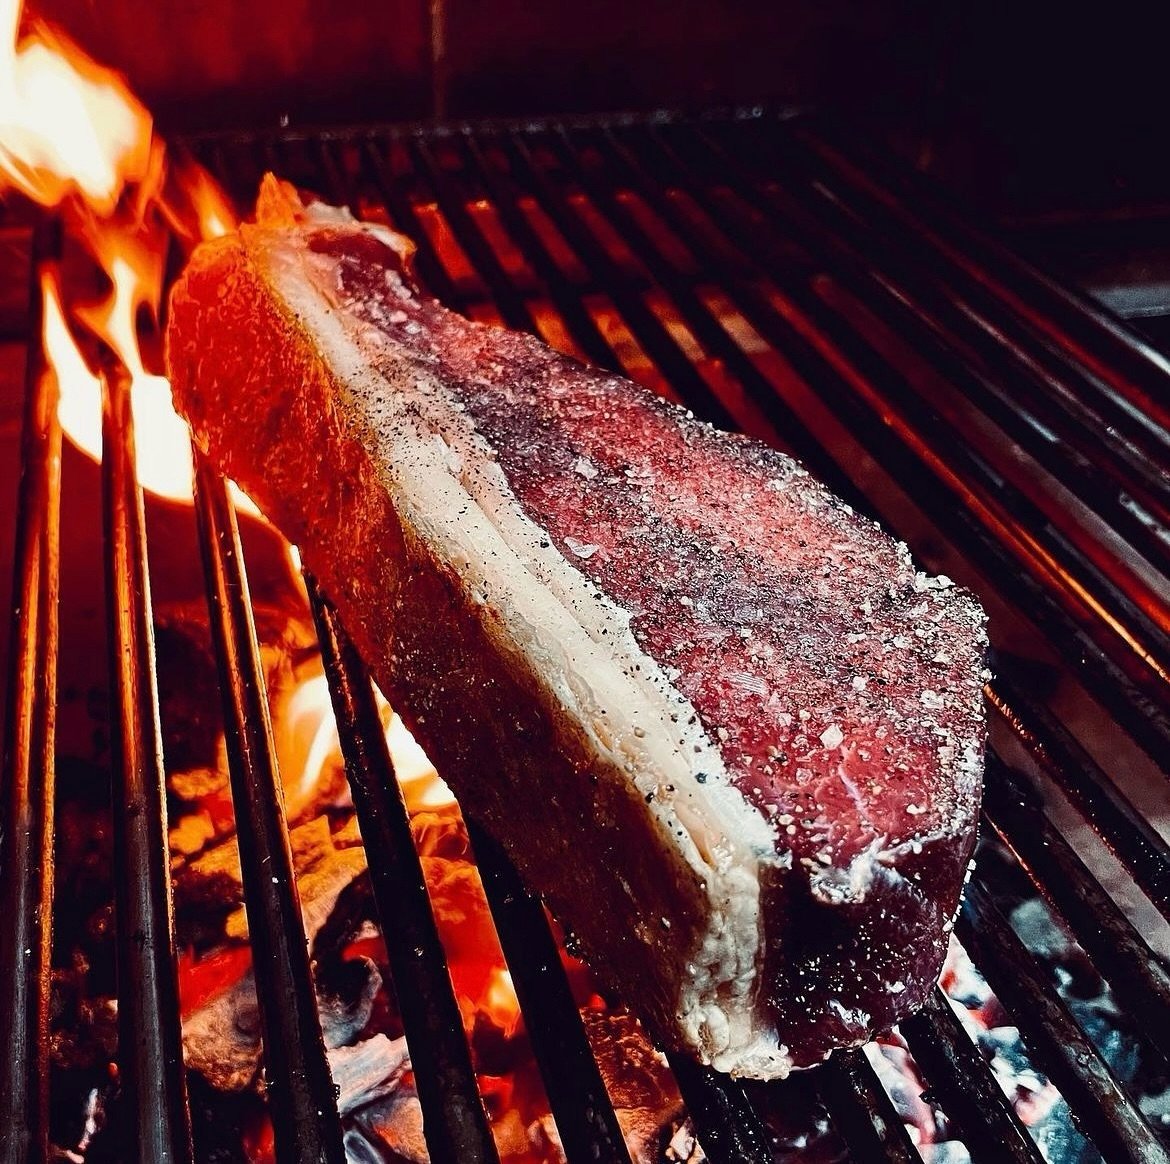 We&rsquo;re keeping things simple at Kindling #rekindled.

Choose from three steaks of the best British and Irish beef, plus larger cuts to share from the specials board, all simply seasoned, and grilled over charcoal. Add your favourite sauce from a